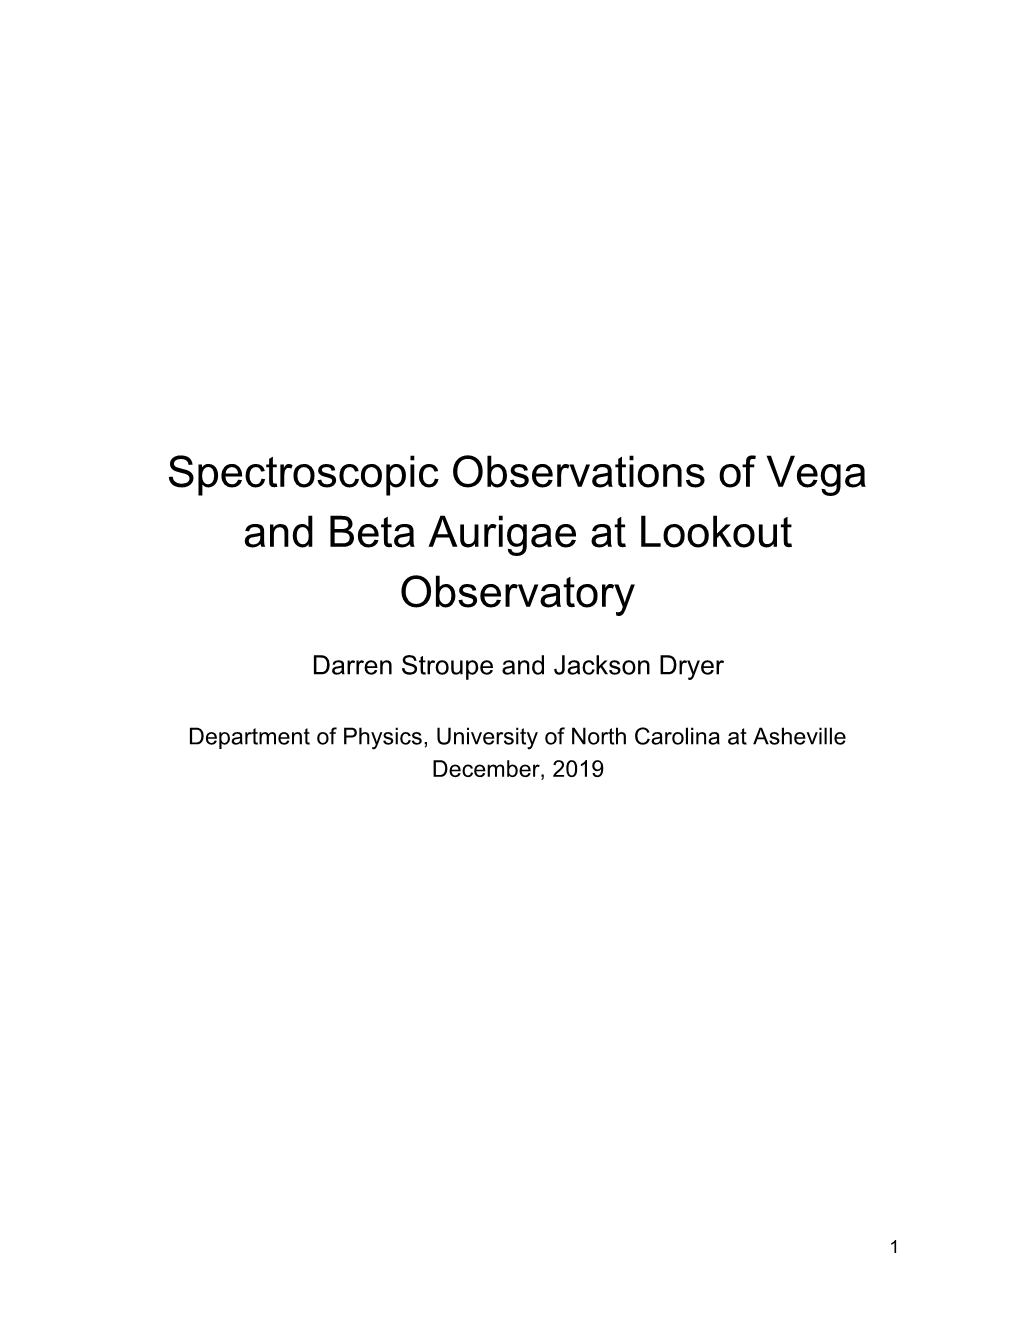 Spectroscopic Observations of Vega and Beta Aurigae at Lookout Observatory